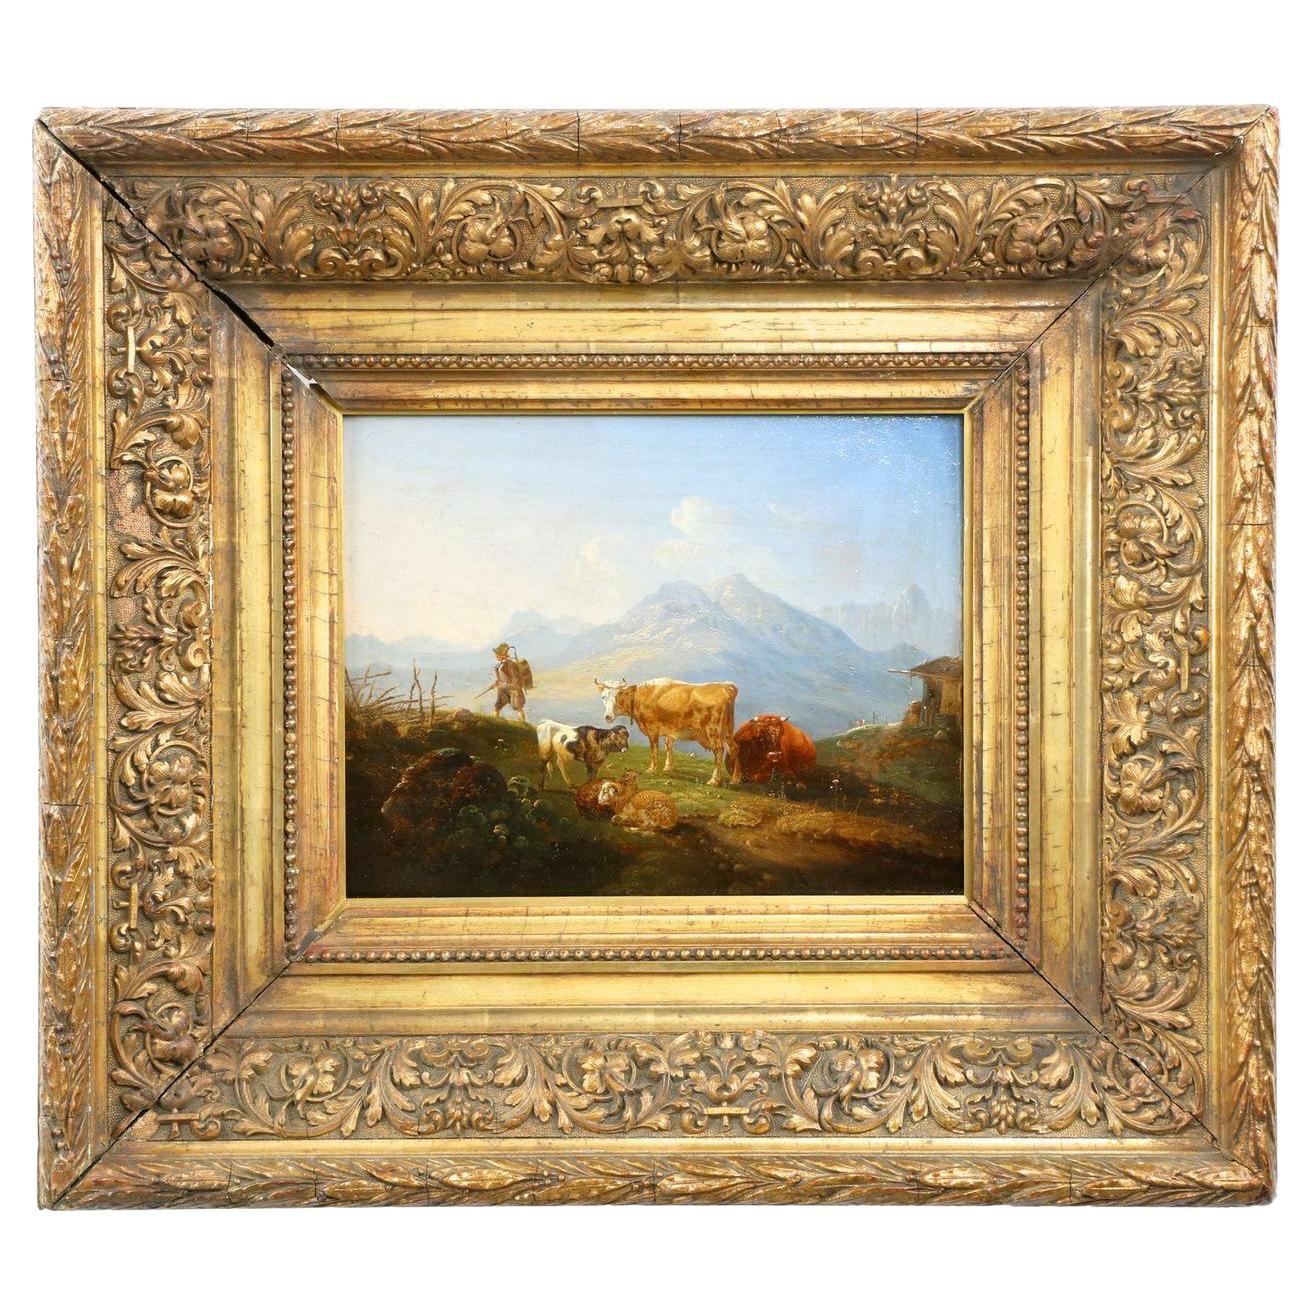 Antique German Mountain Landscape Oil Painting of Cattle and Sheep, 19th Century